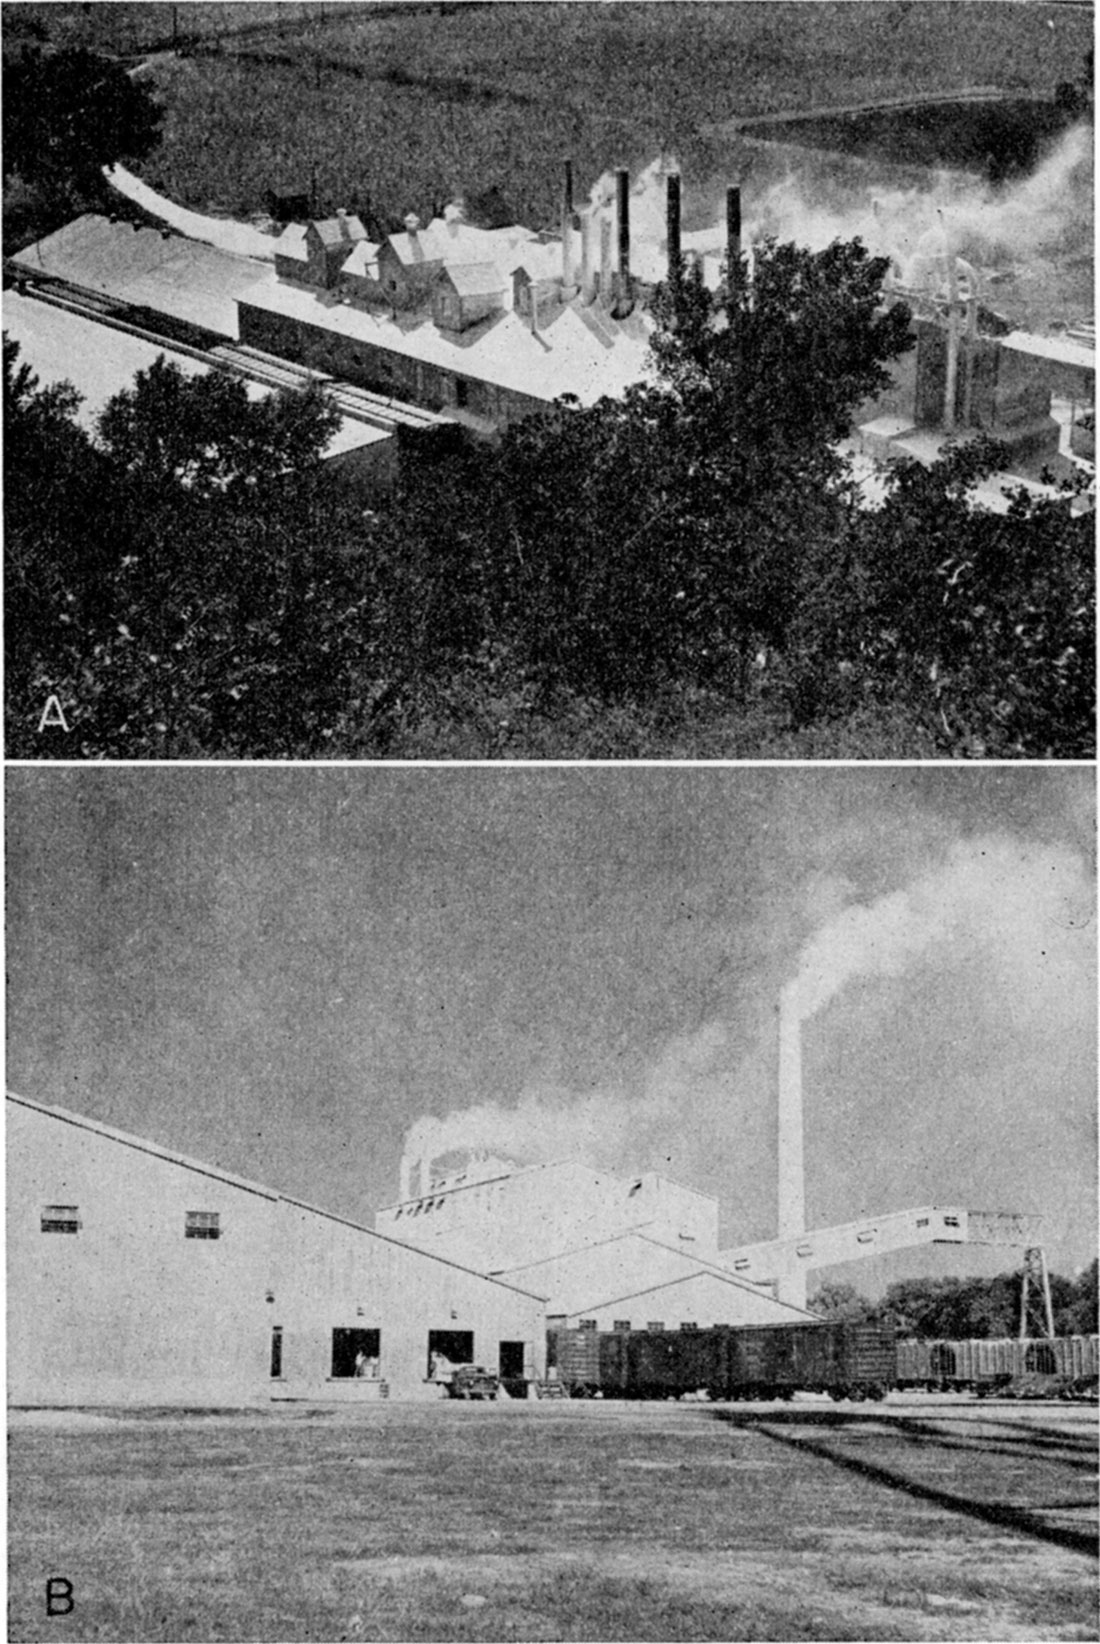 Two black and white photos; top is Certainteed Products Co. plant; bottom is National Gypsum Co. plant.